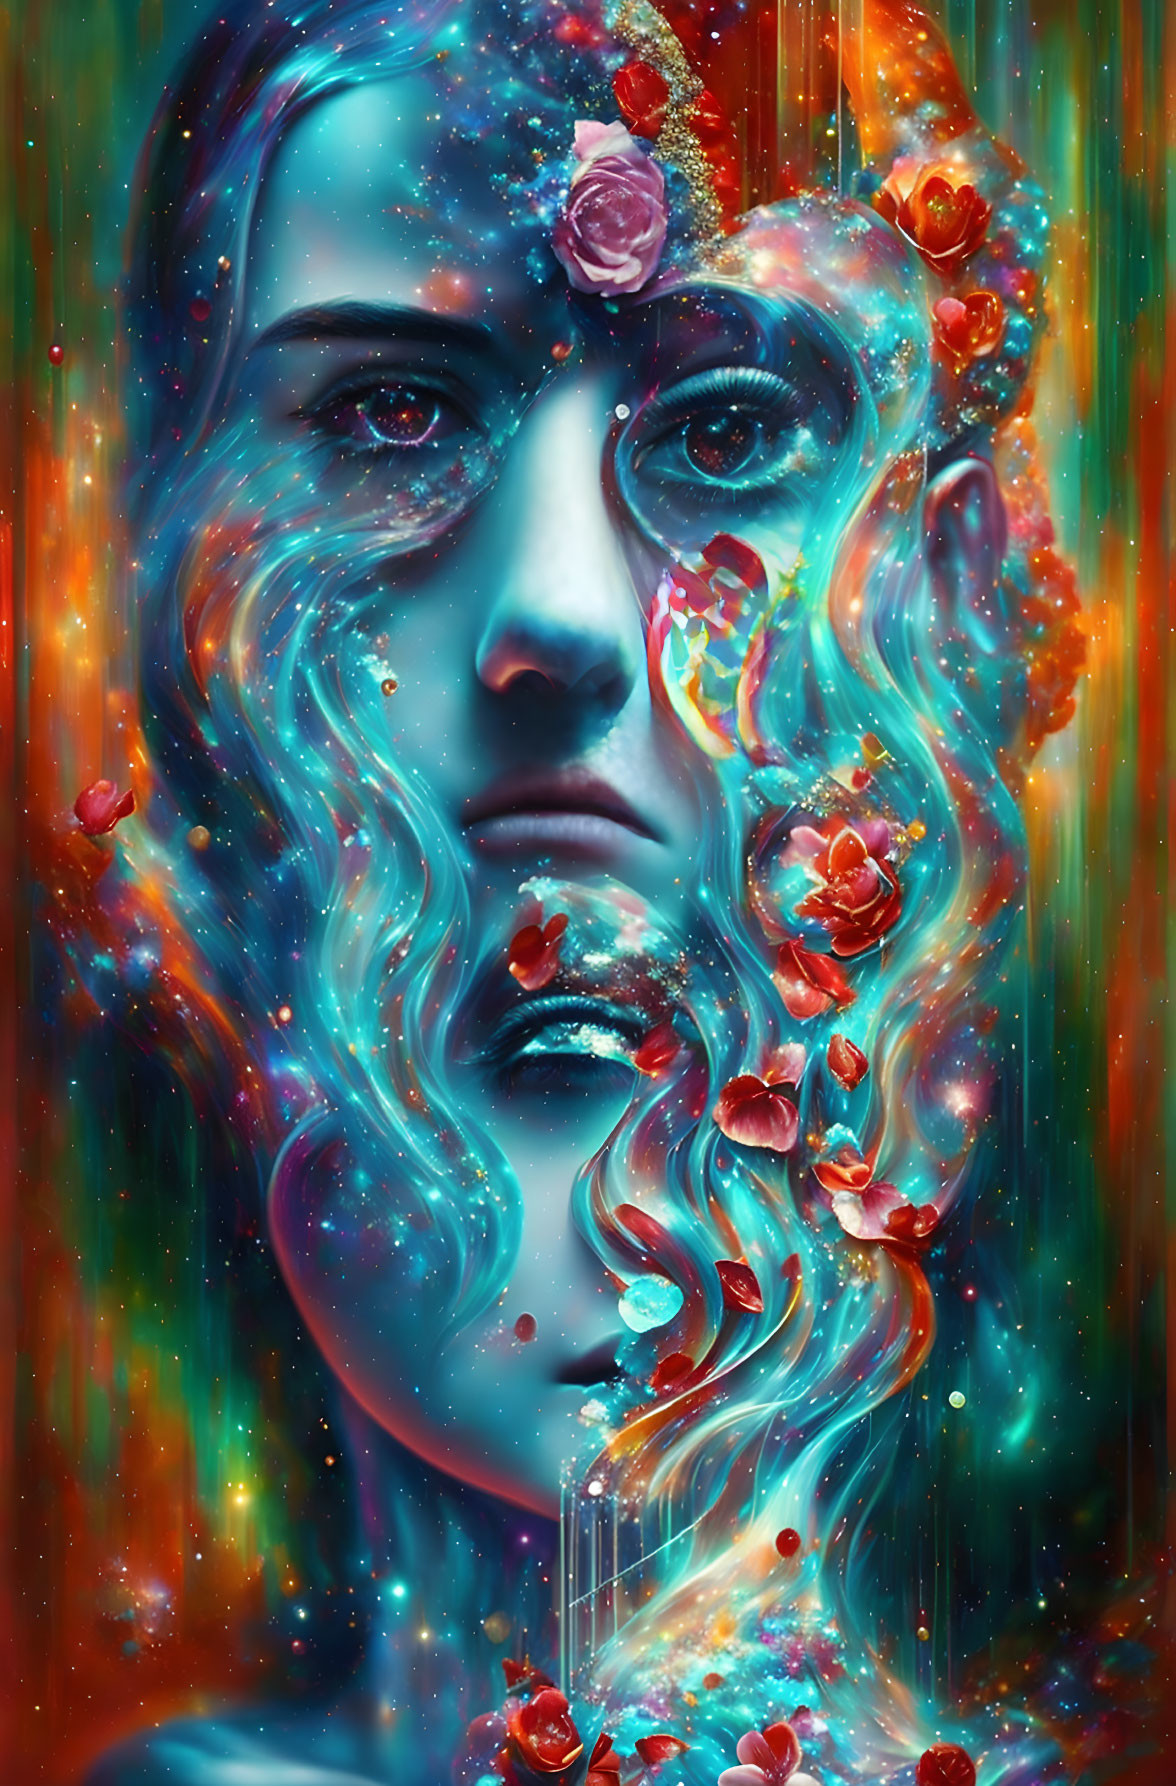 Digital Artwork: Woman merged with cosmic background, adorned with roses